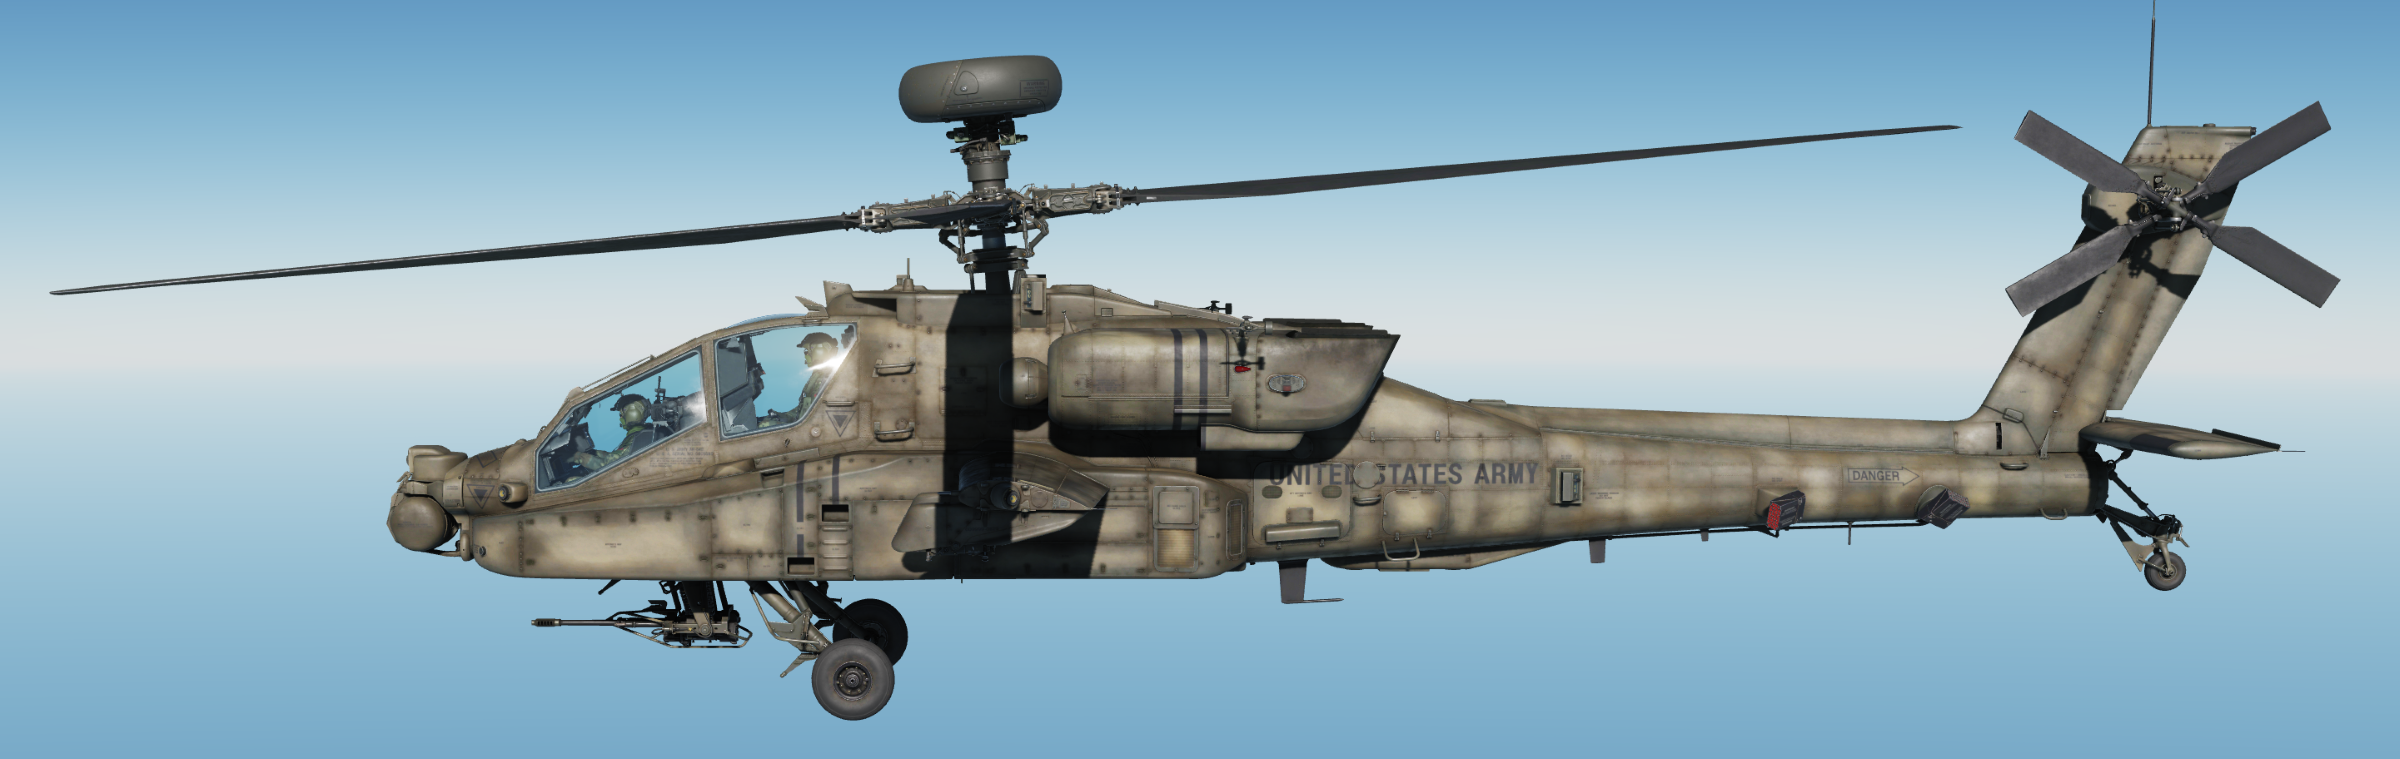 AH-64D Weathered